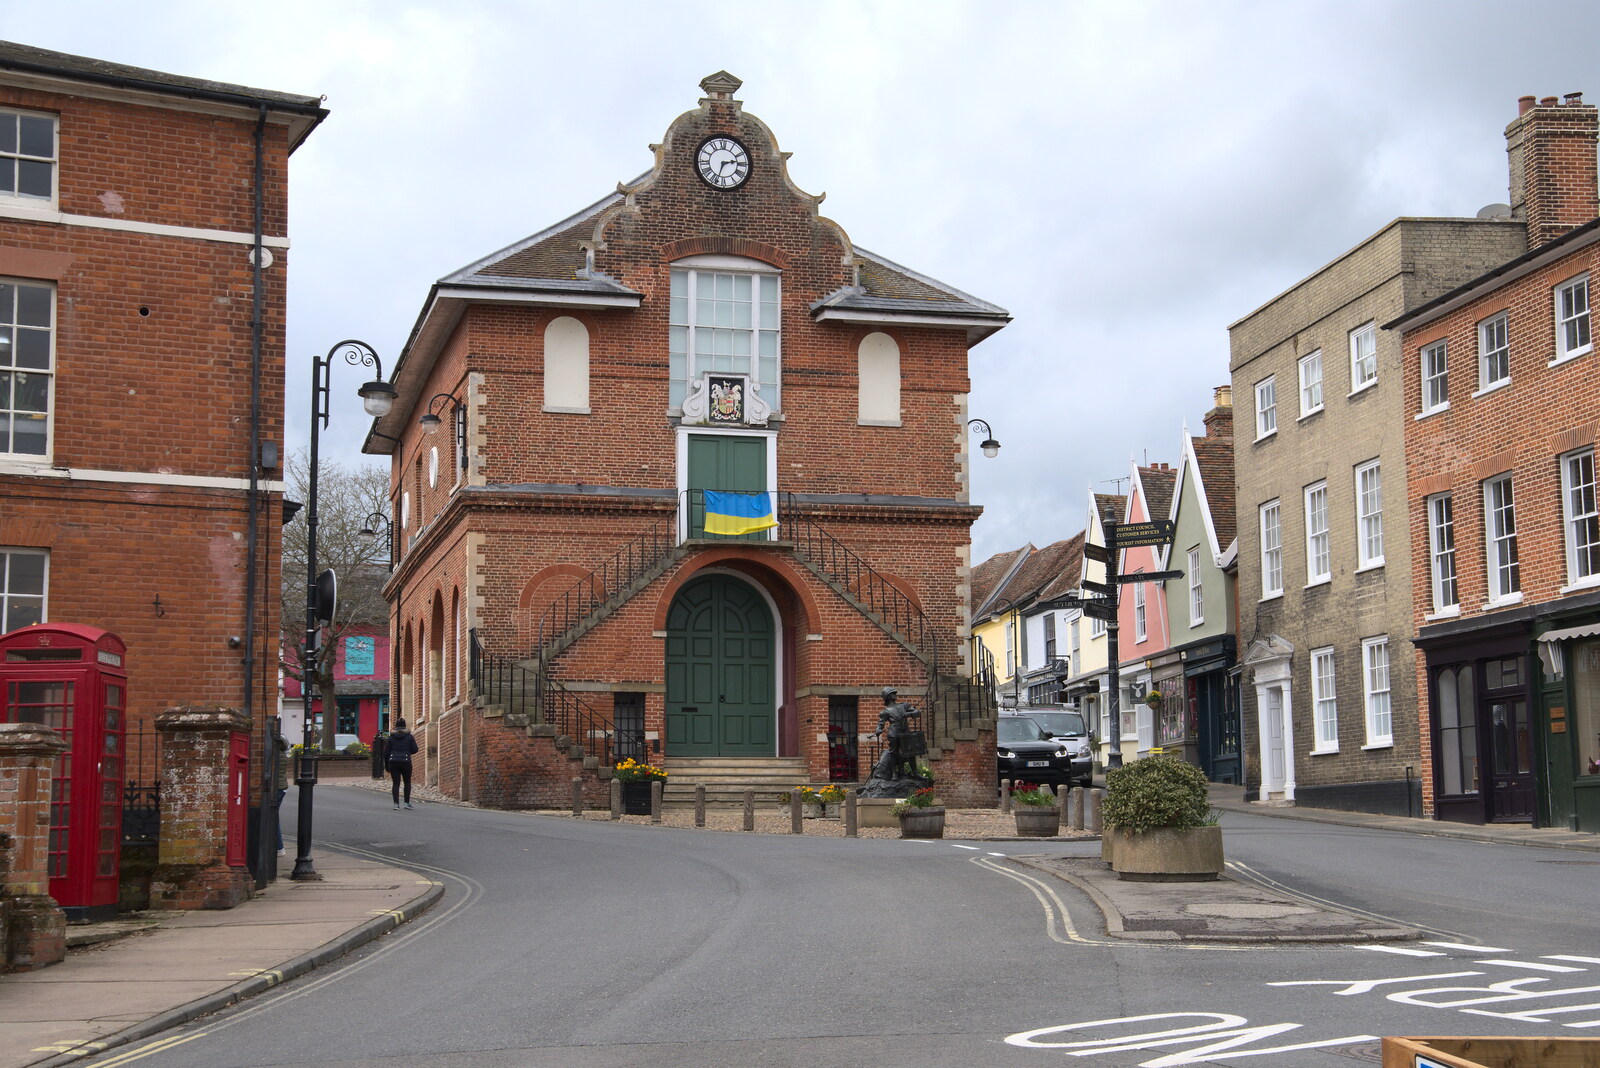 A Trip Down South, New Milton, Hampshire - 9th April 2022: The town hall in Woodbridge